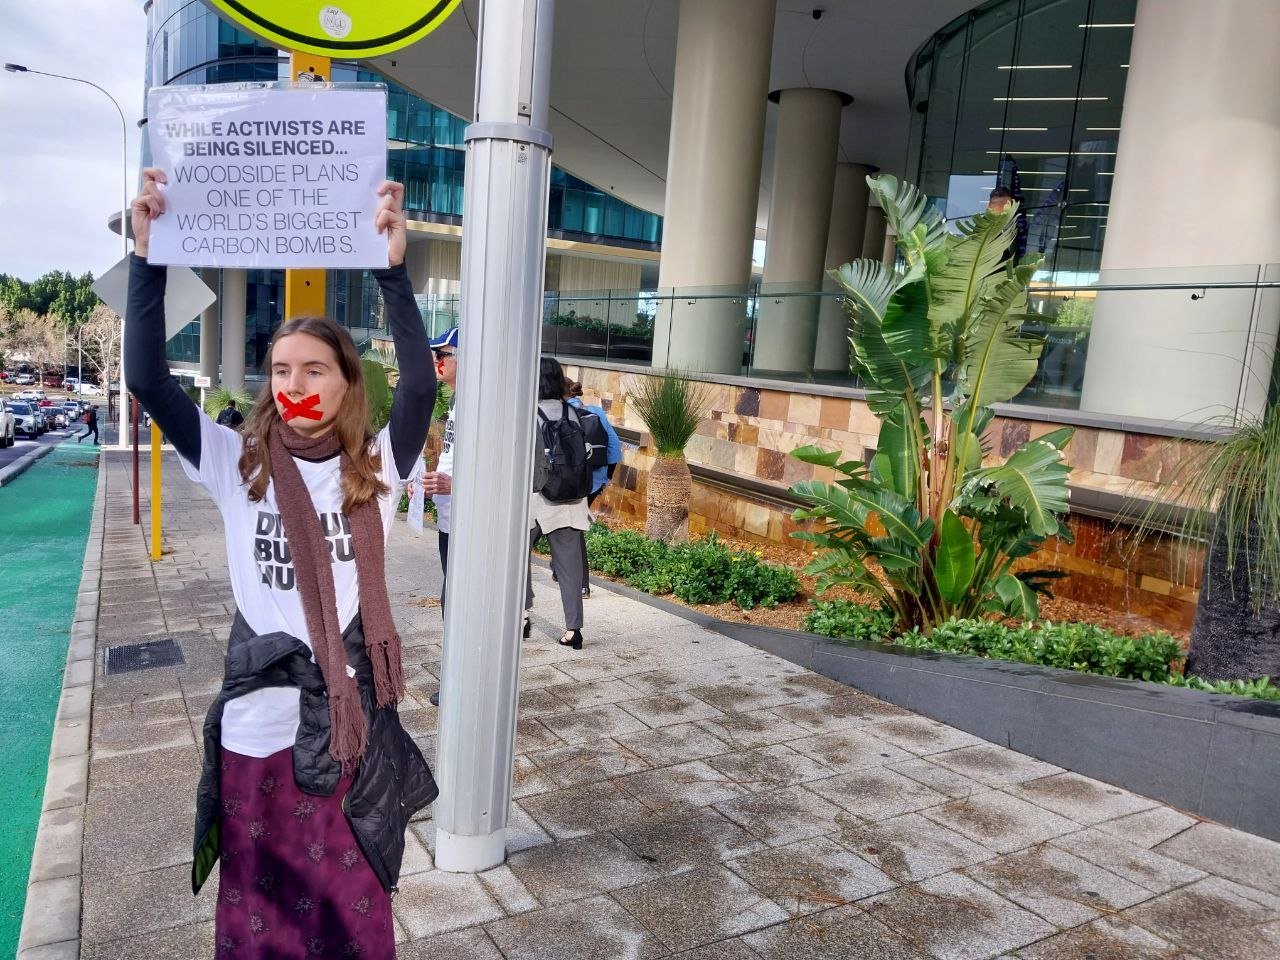 Disrupt Burrup Hub convenes silent protest outside Woodside HQ to call out  VRO's and police repression. — DISRUPT BURRUP HUB